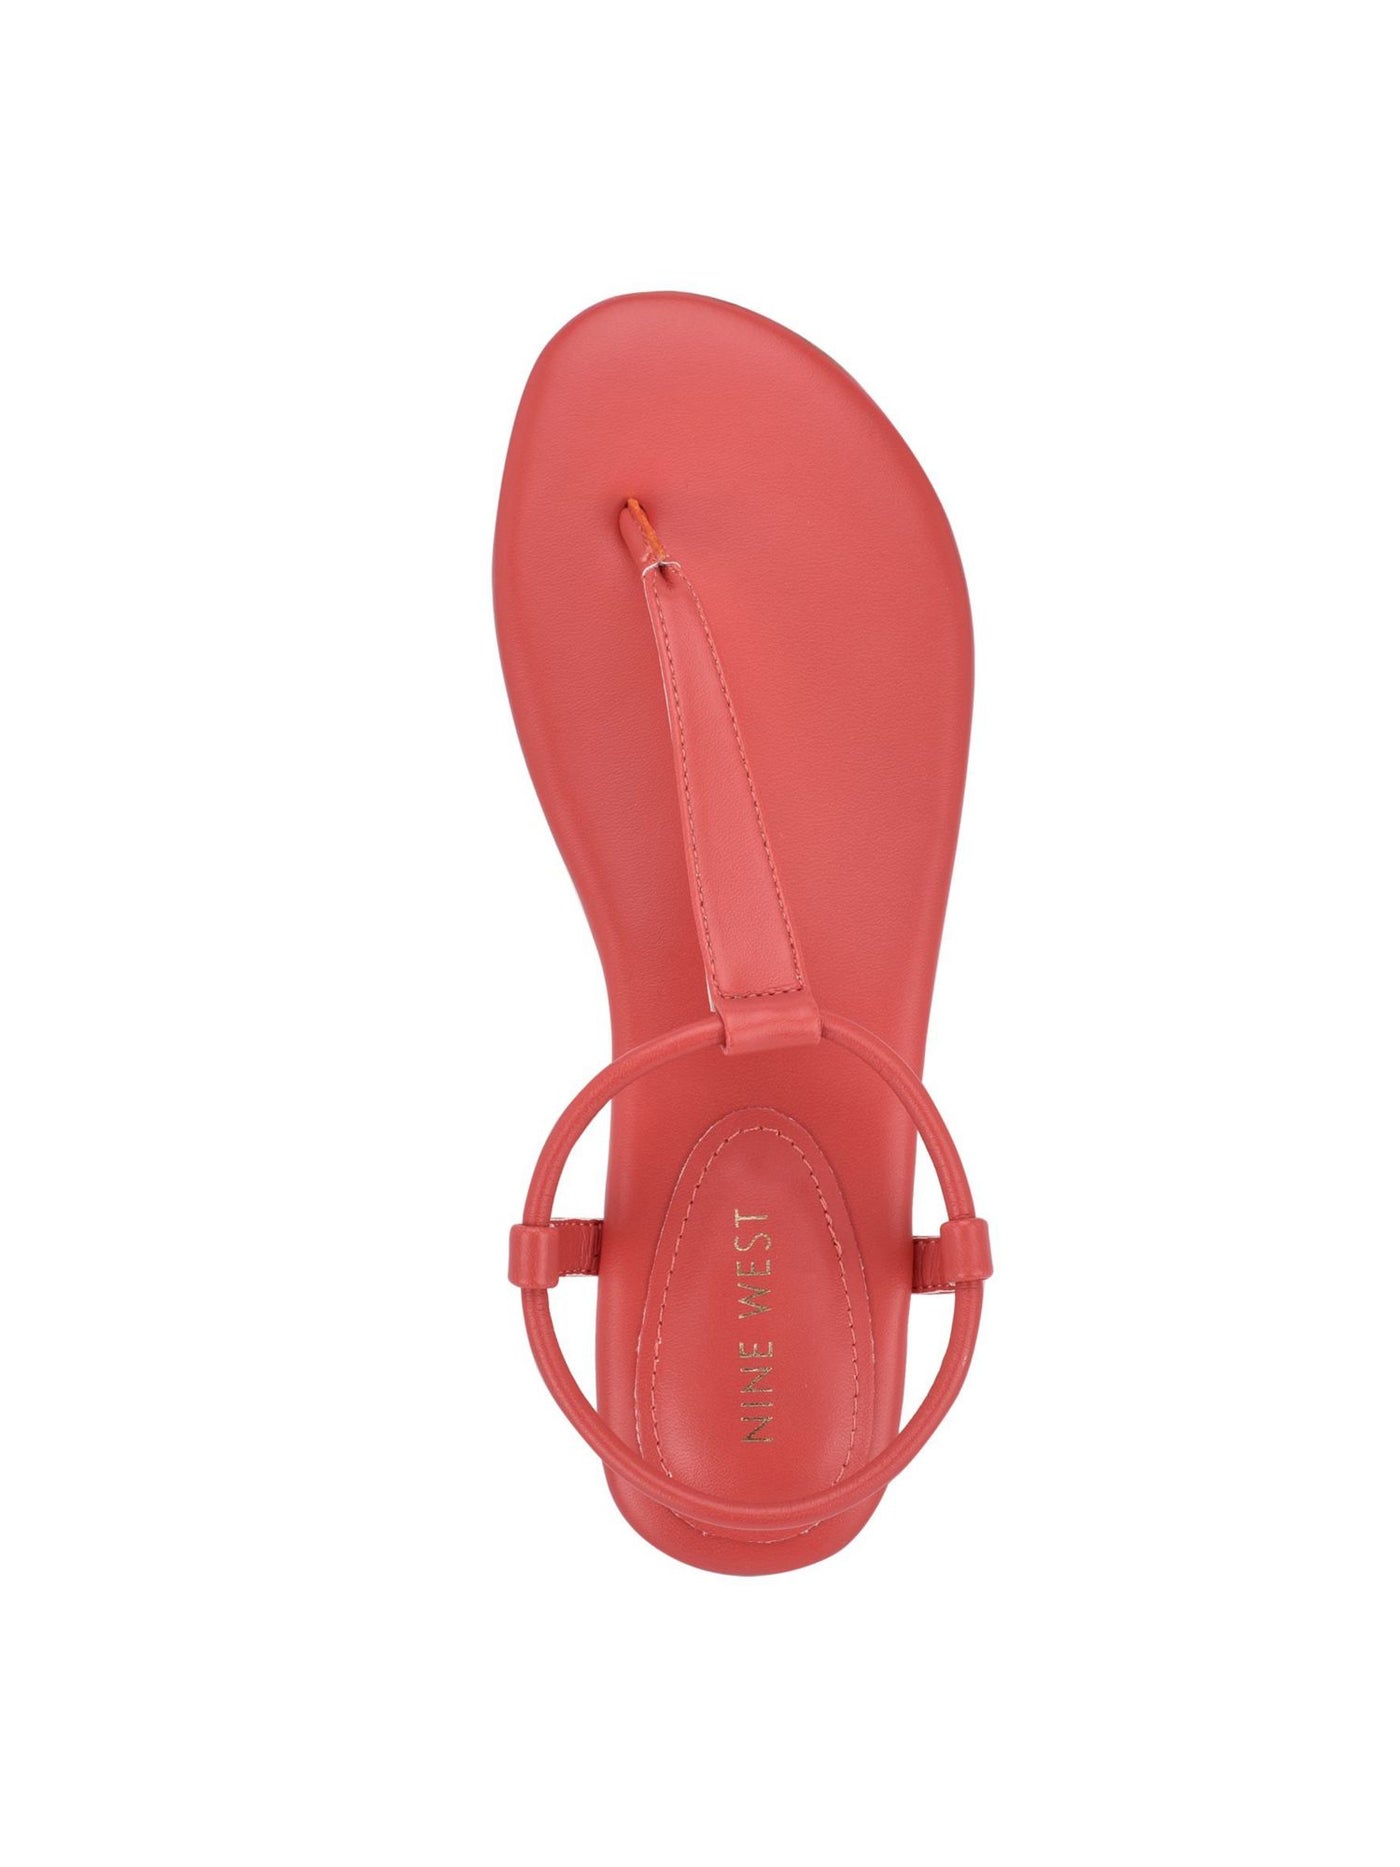 NINE WEST Womens Coral Cushioned Bassie Round Toe Slip On Thong Sandals 9.5 M